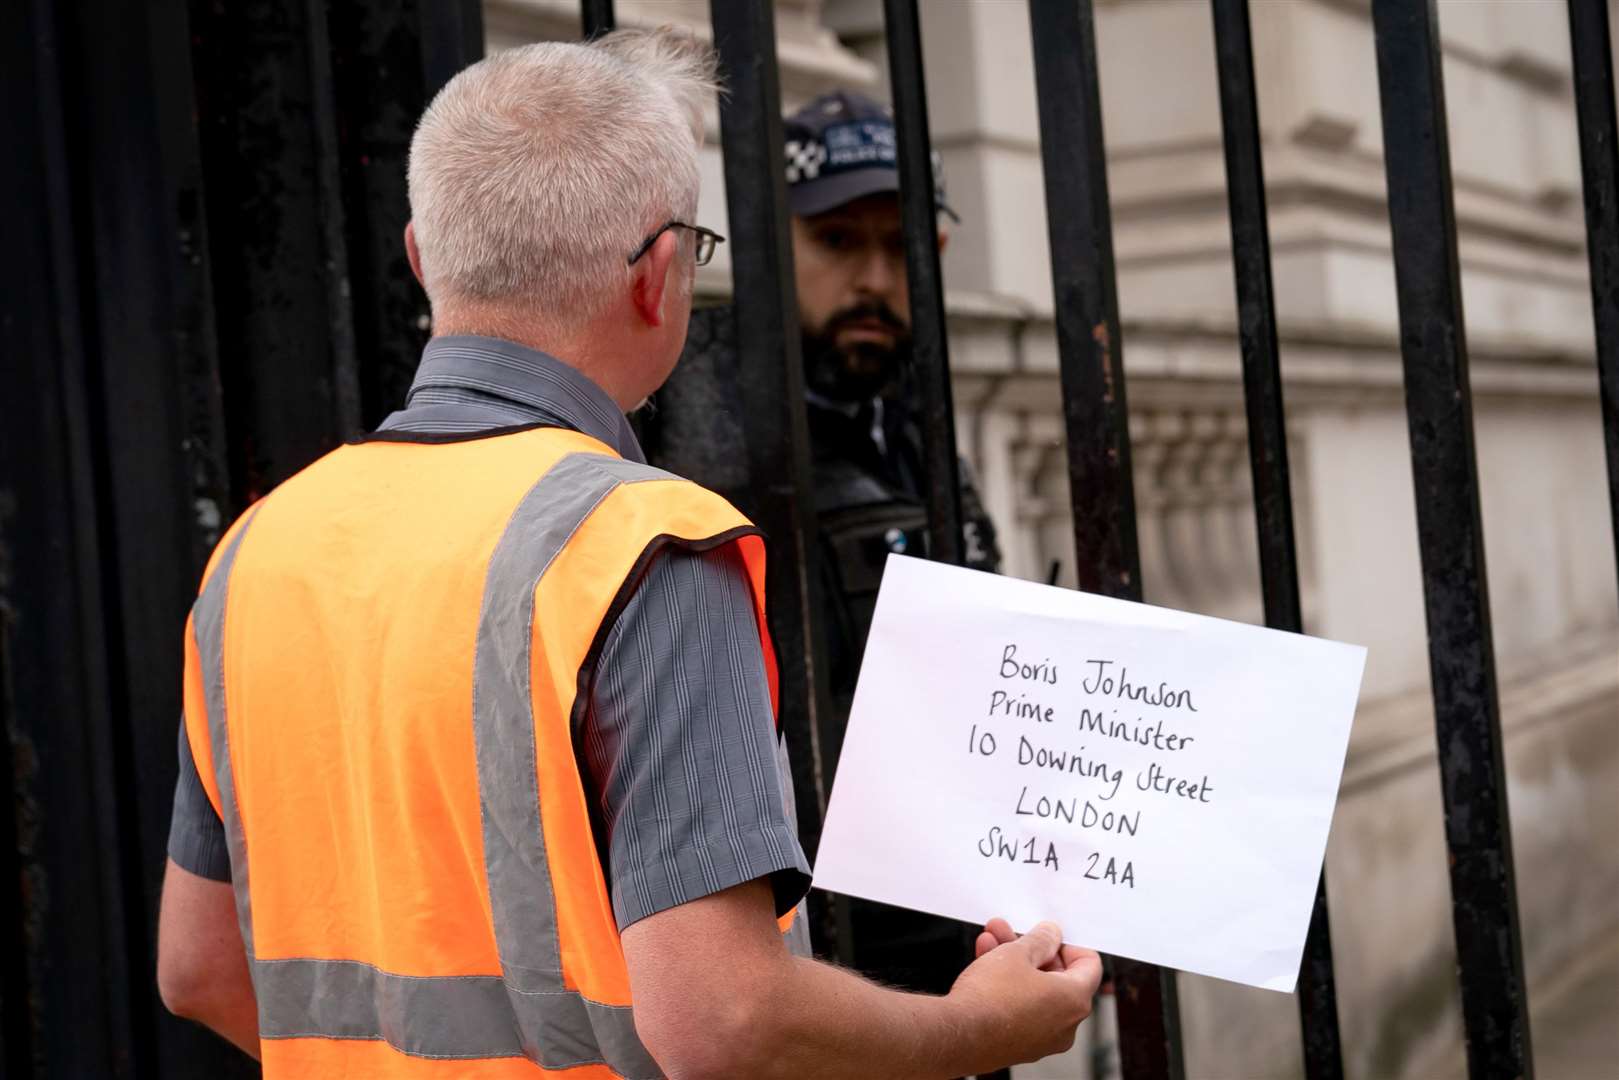 A member of Insulate Britain attempts to hand in a letter for Prime Minister Boris Johnson at 10 Downing Street (PA)